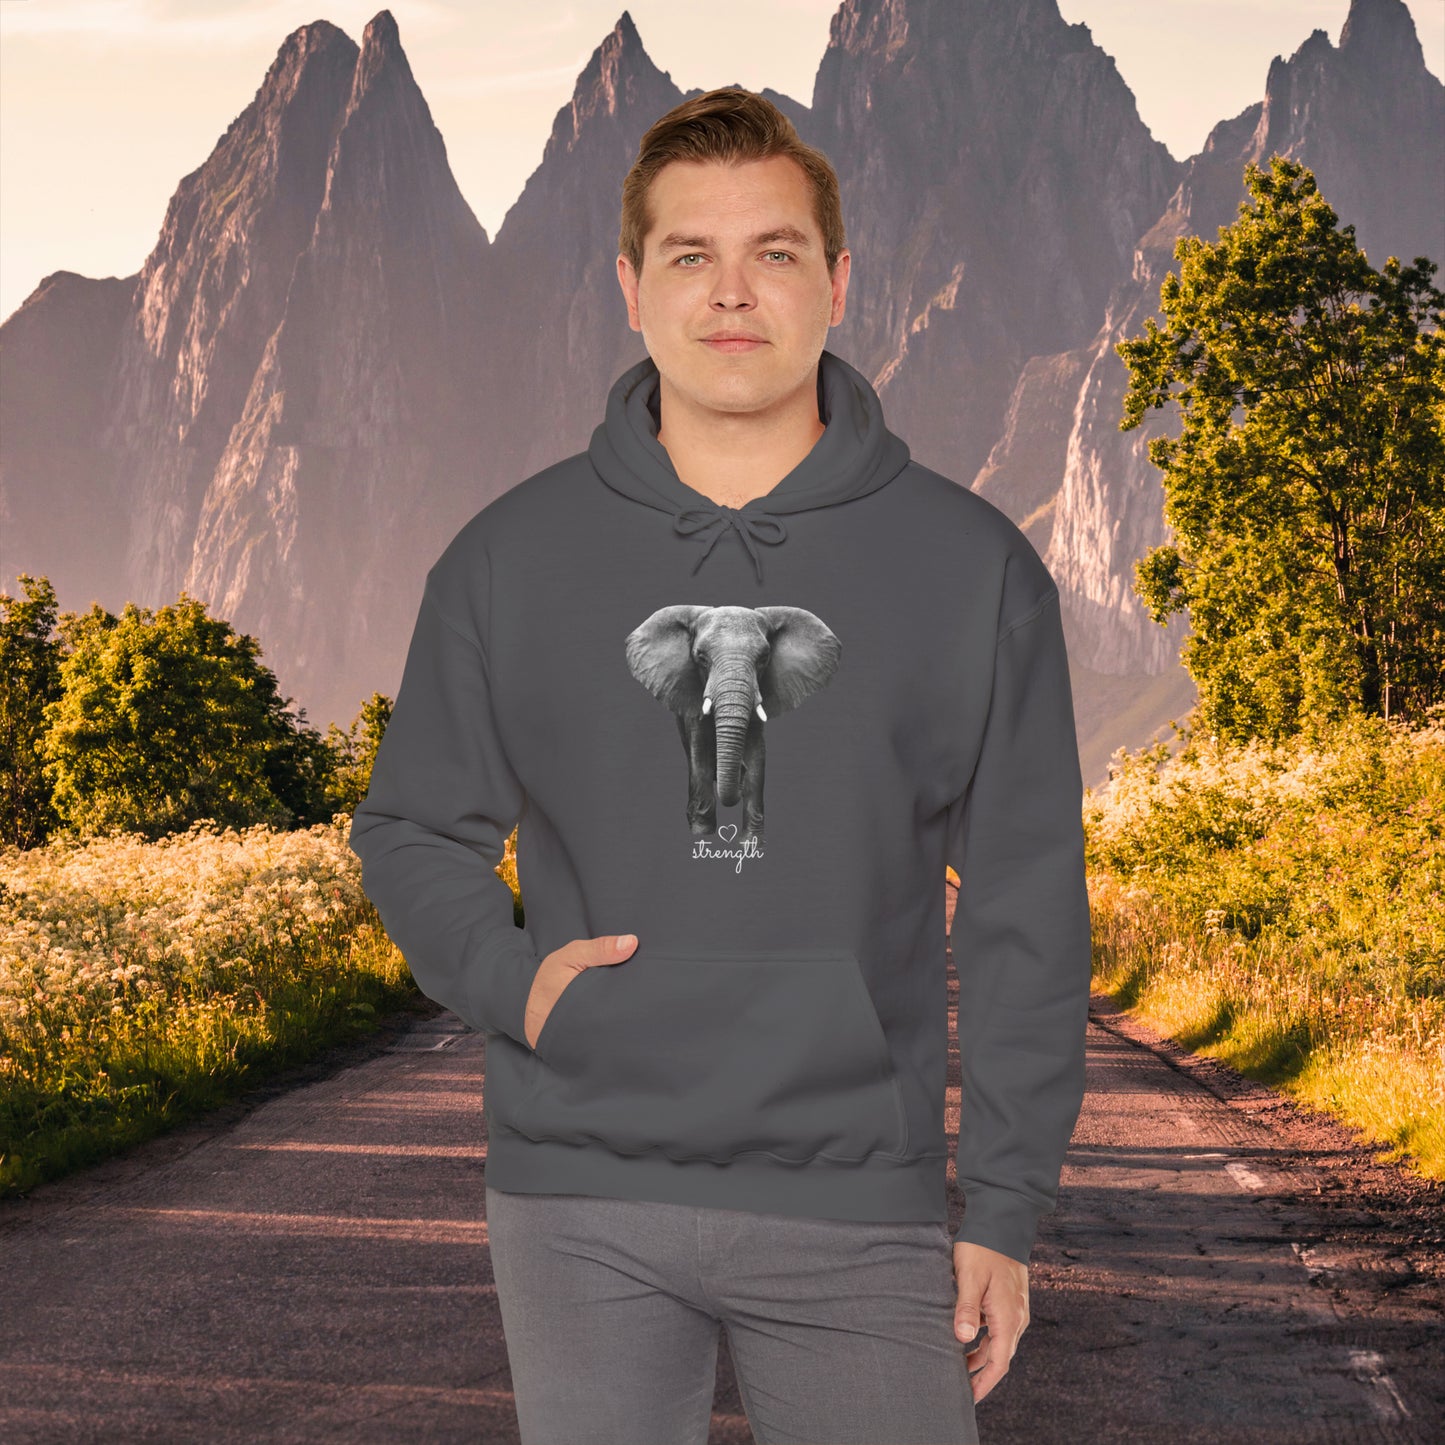 Love elephants? Then this Unisex Heavy Blend™ Hooded Sweatshirt is perfect for you!